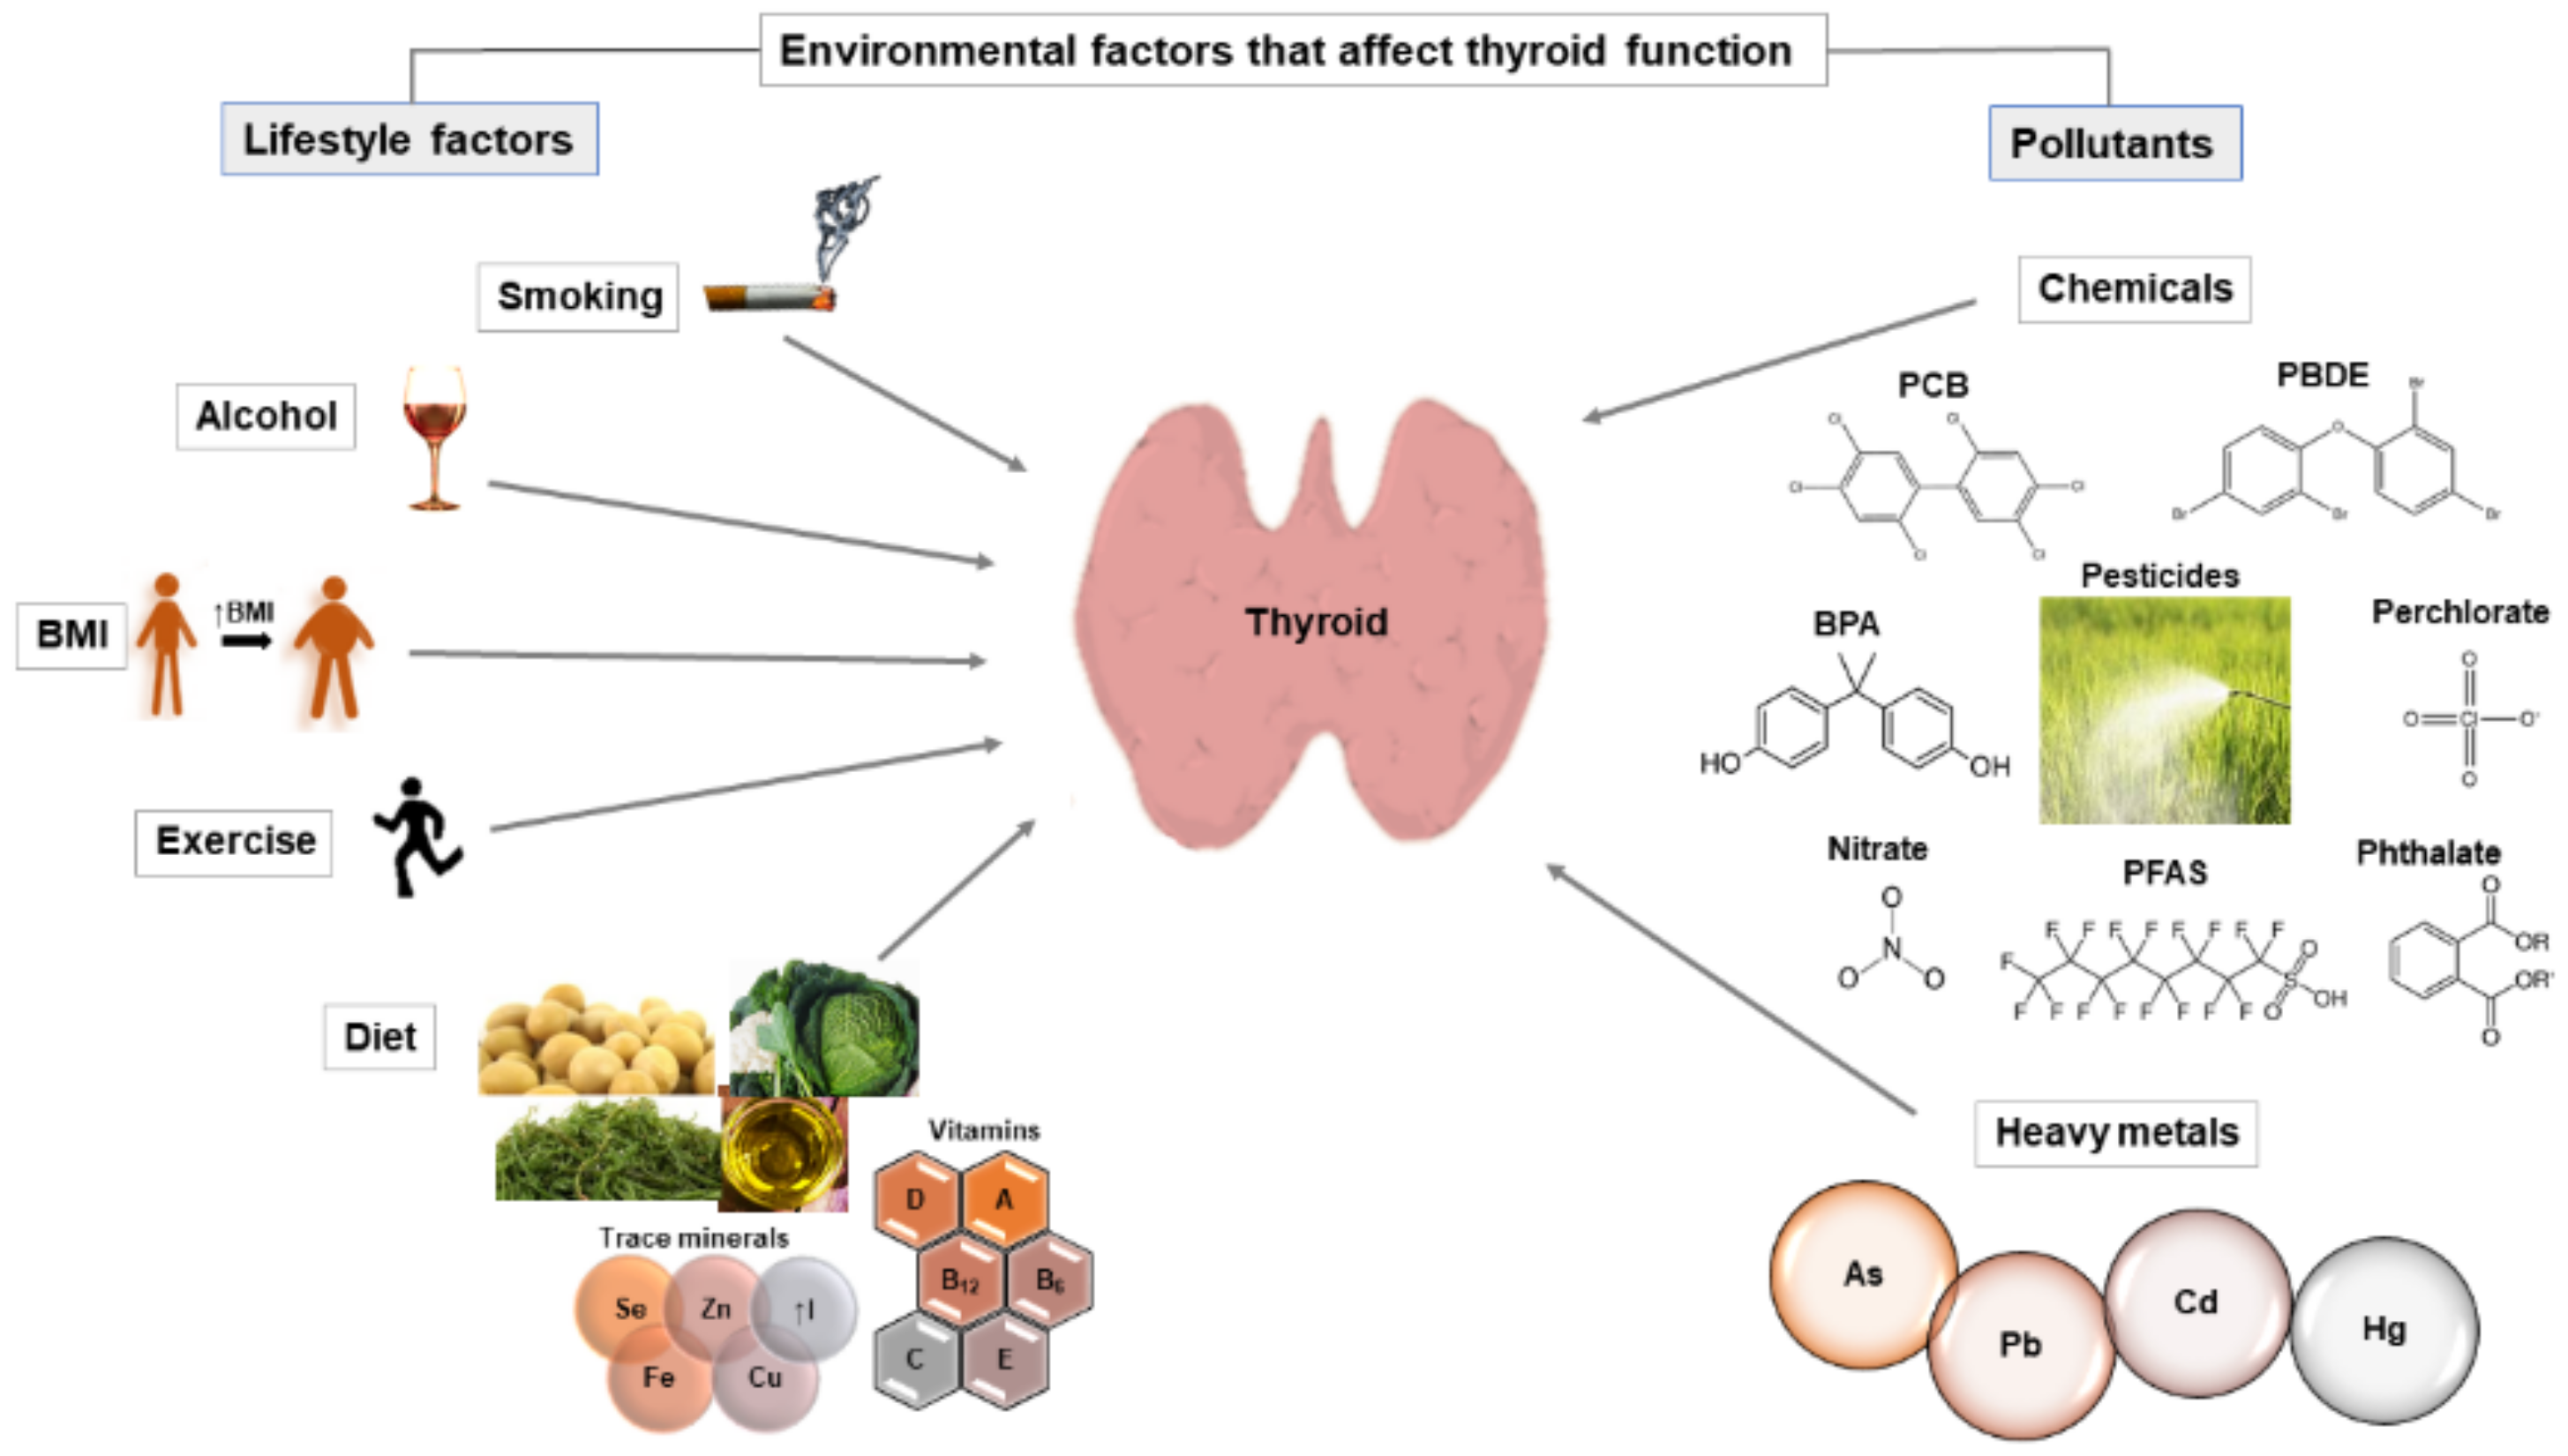 II. Factors Affecting Iodine Requirements for Thyroid Hormone Production